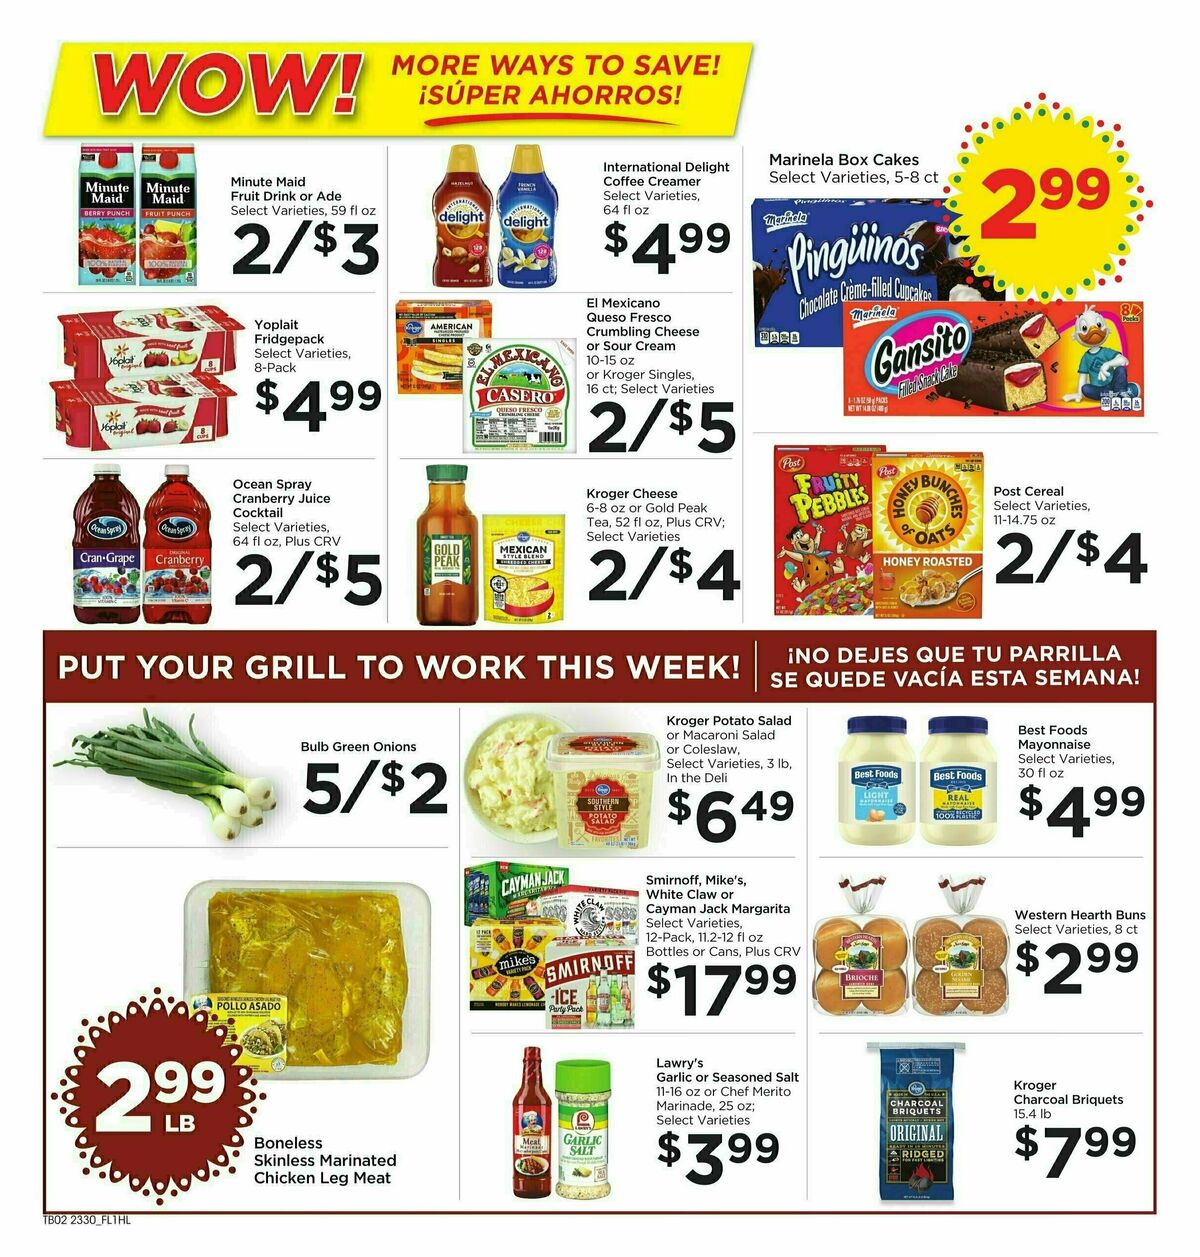 Food 4 Less Weekly Ad from August 23